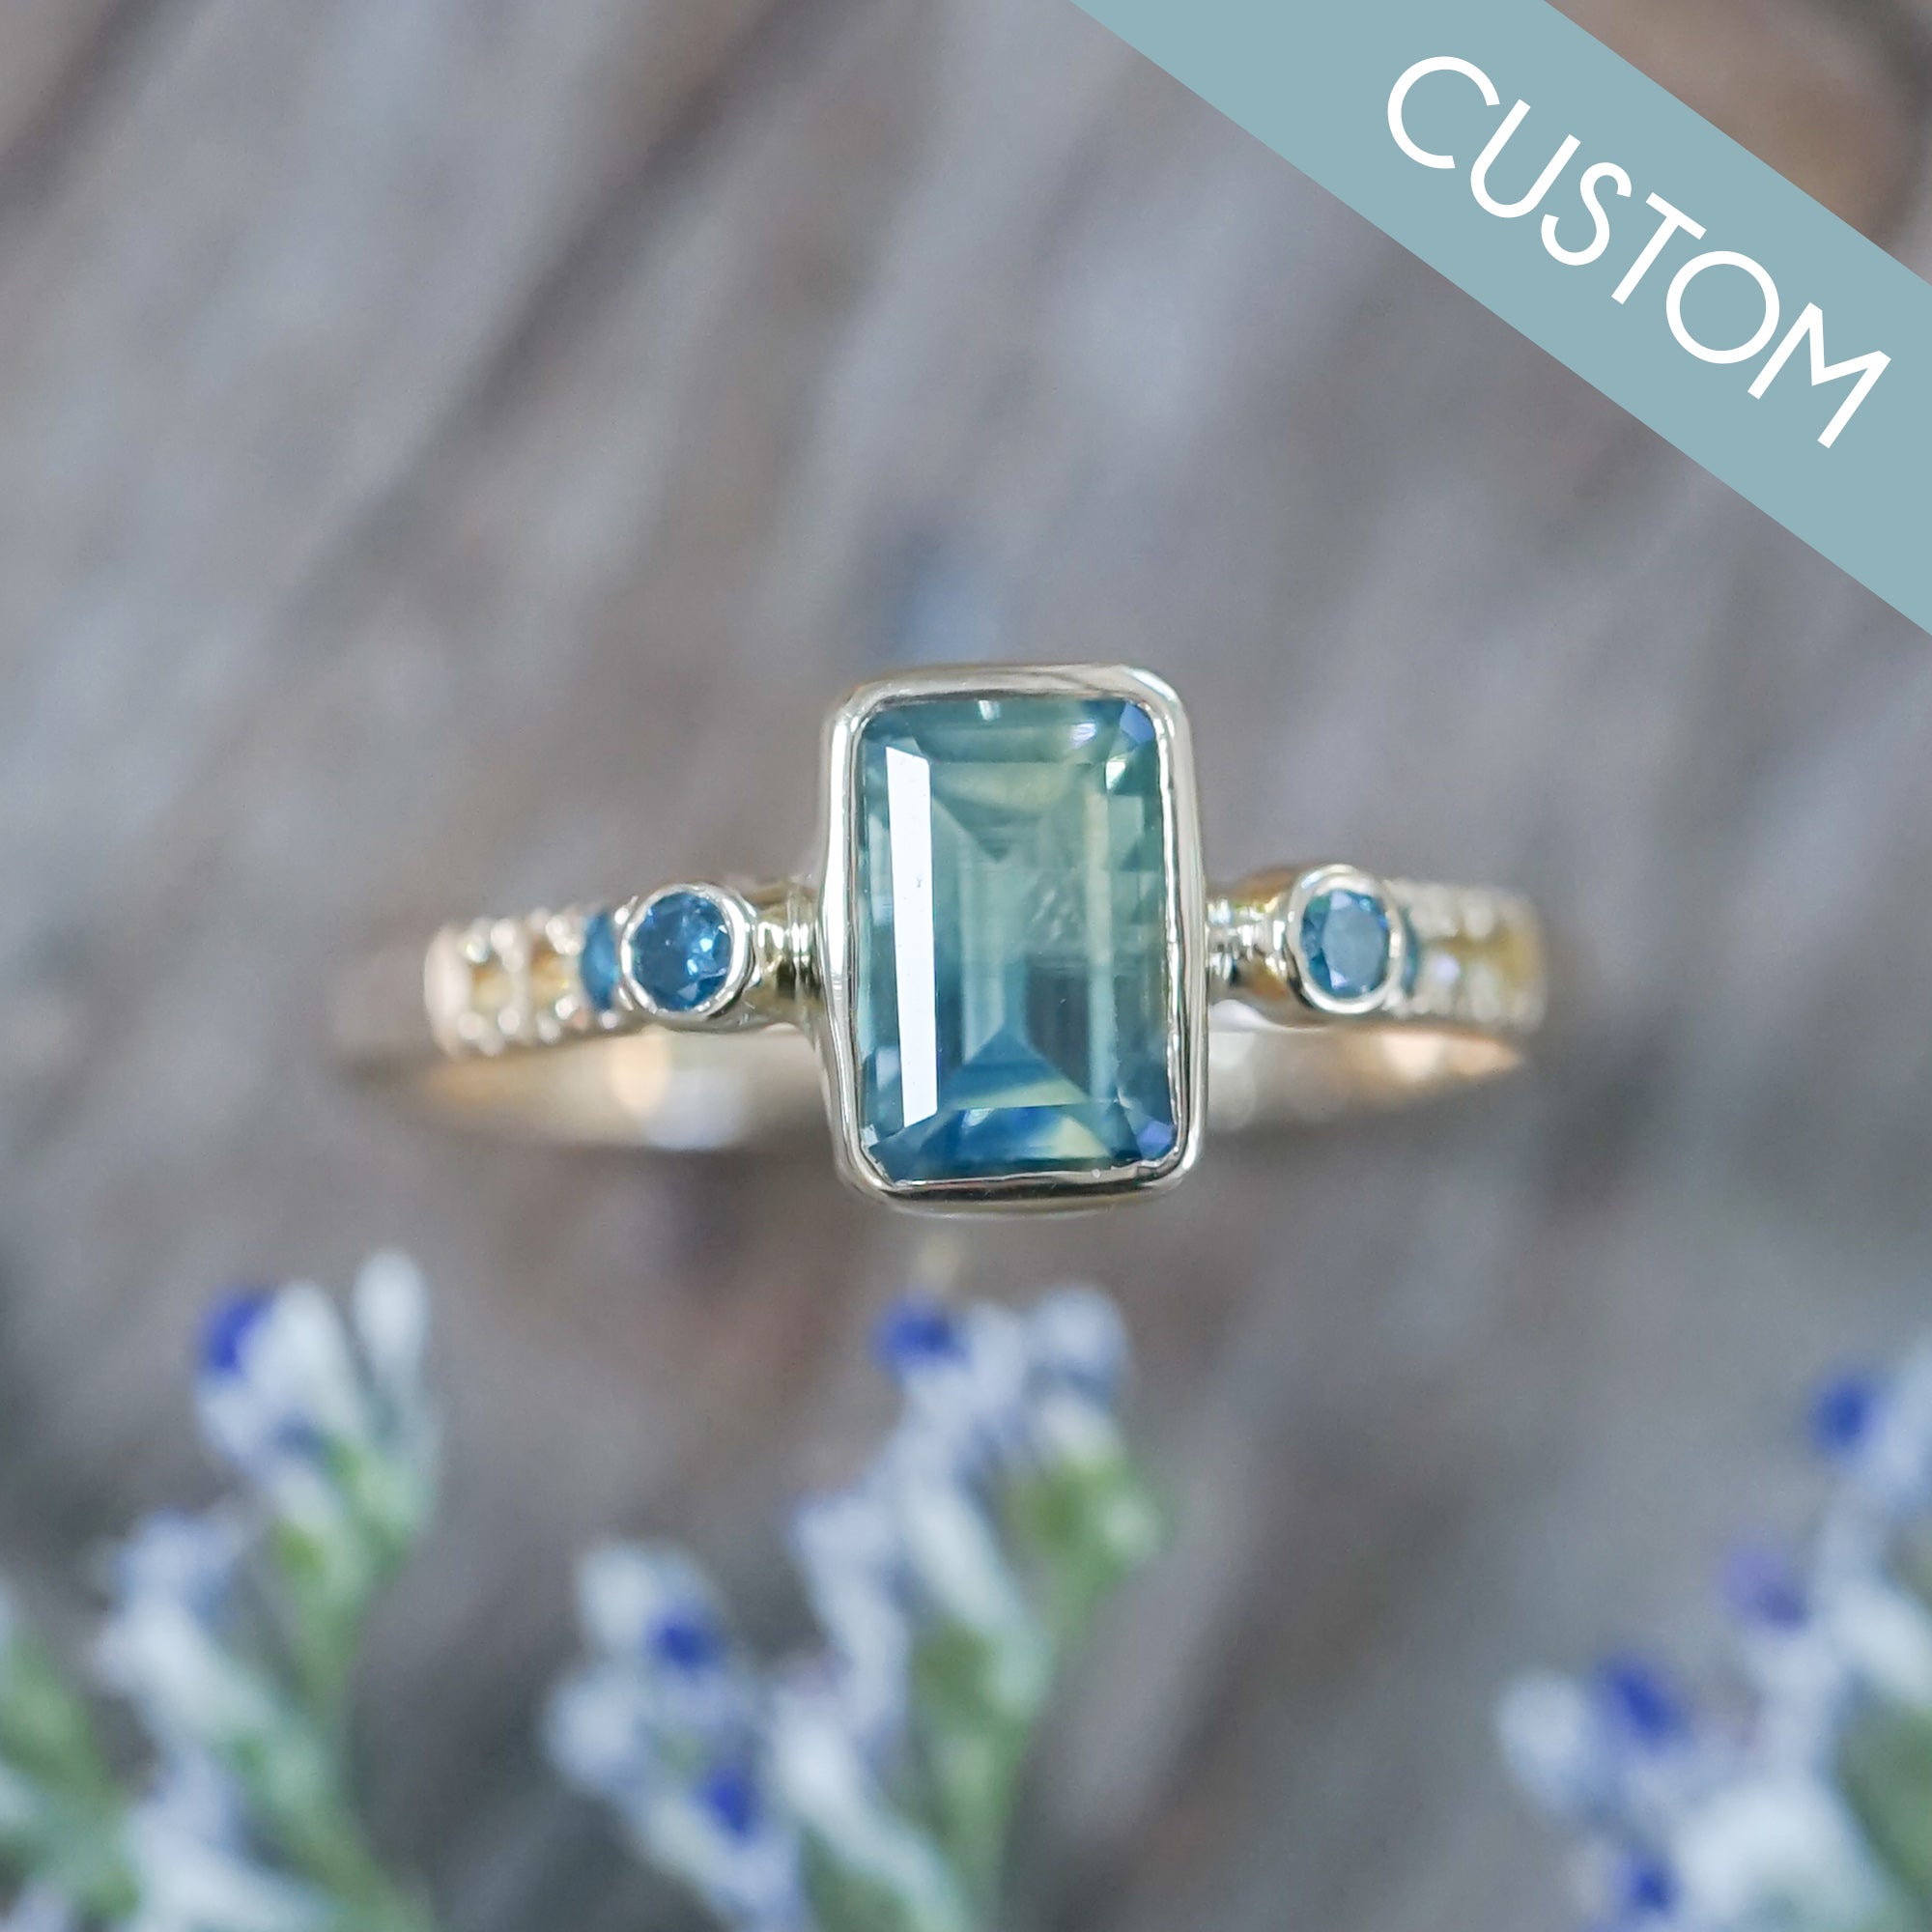 Custom Bicolor Sapphire Ring in Gold - Gardens of the Sun | Ethical Jewelry